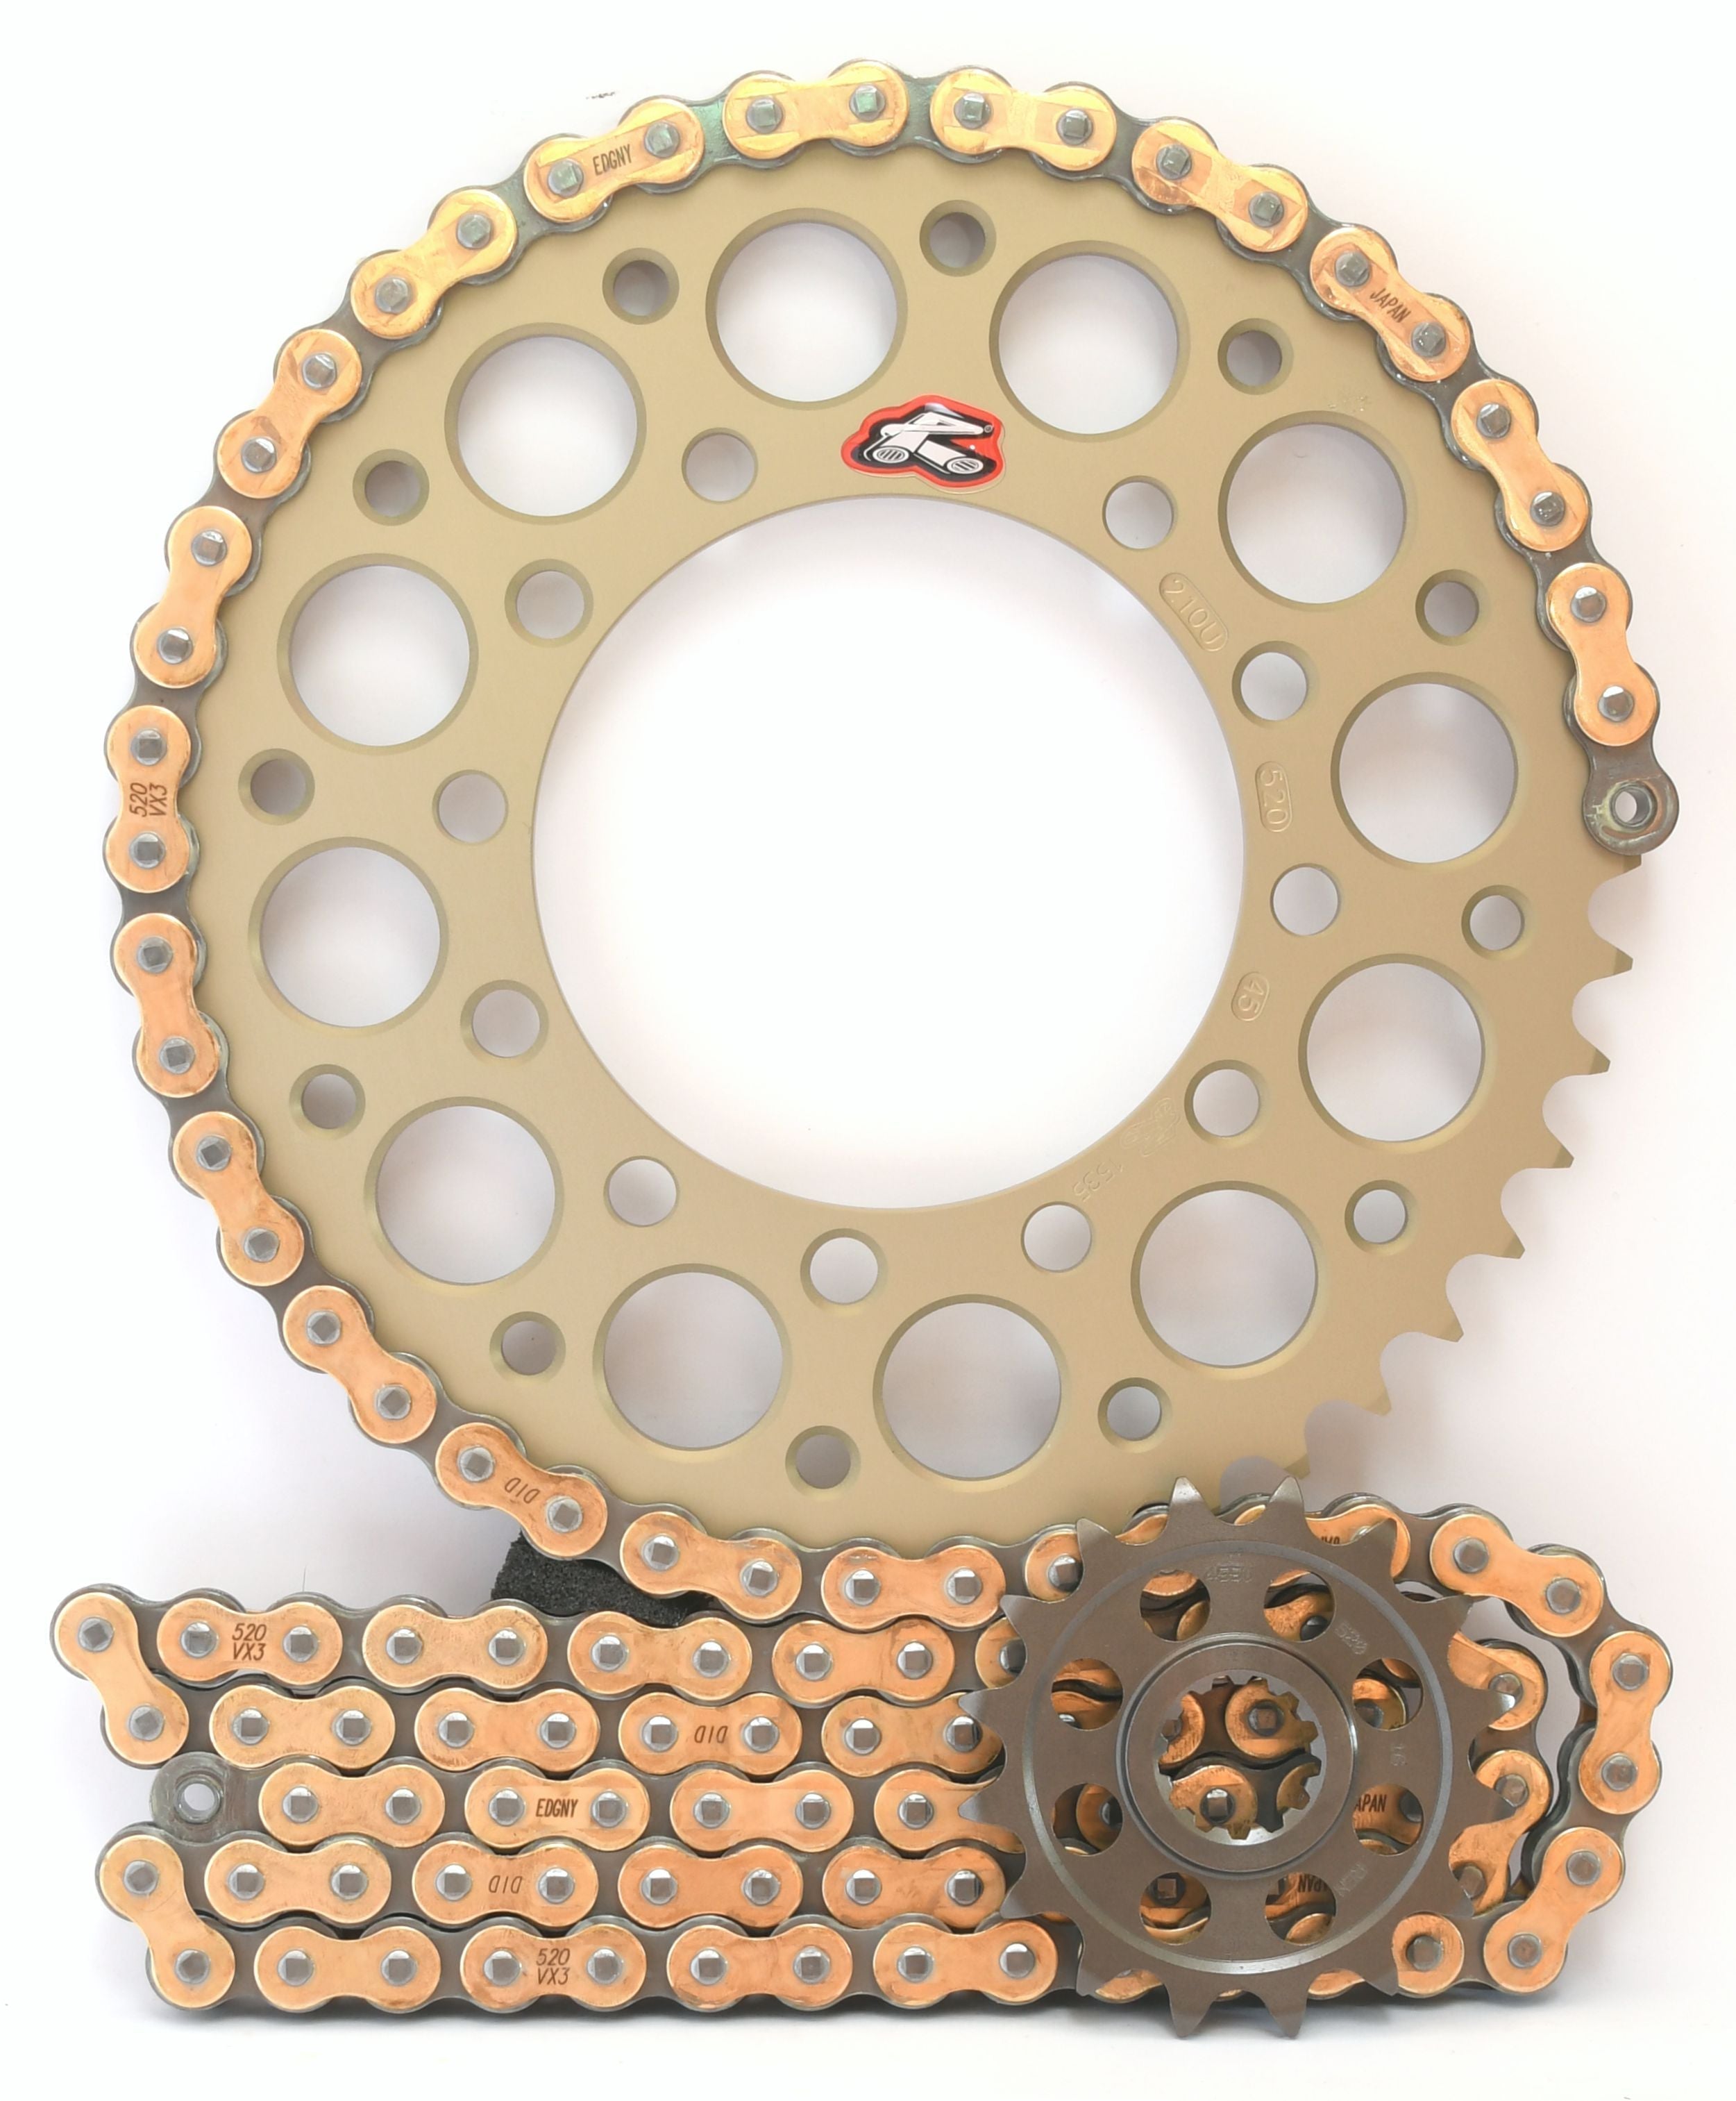 Renthal Ultralight and DID 520 Conversion Chain & Sprocket Kit for Kawasaki ZX10R 2008-2010 - Standard Gearing